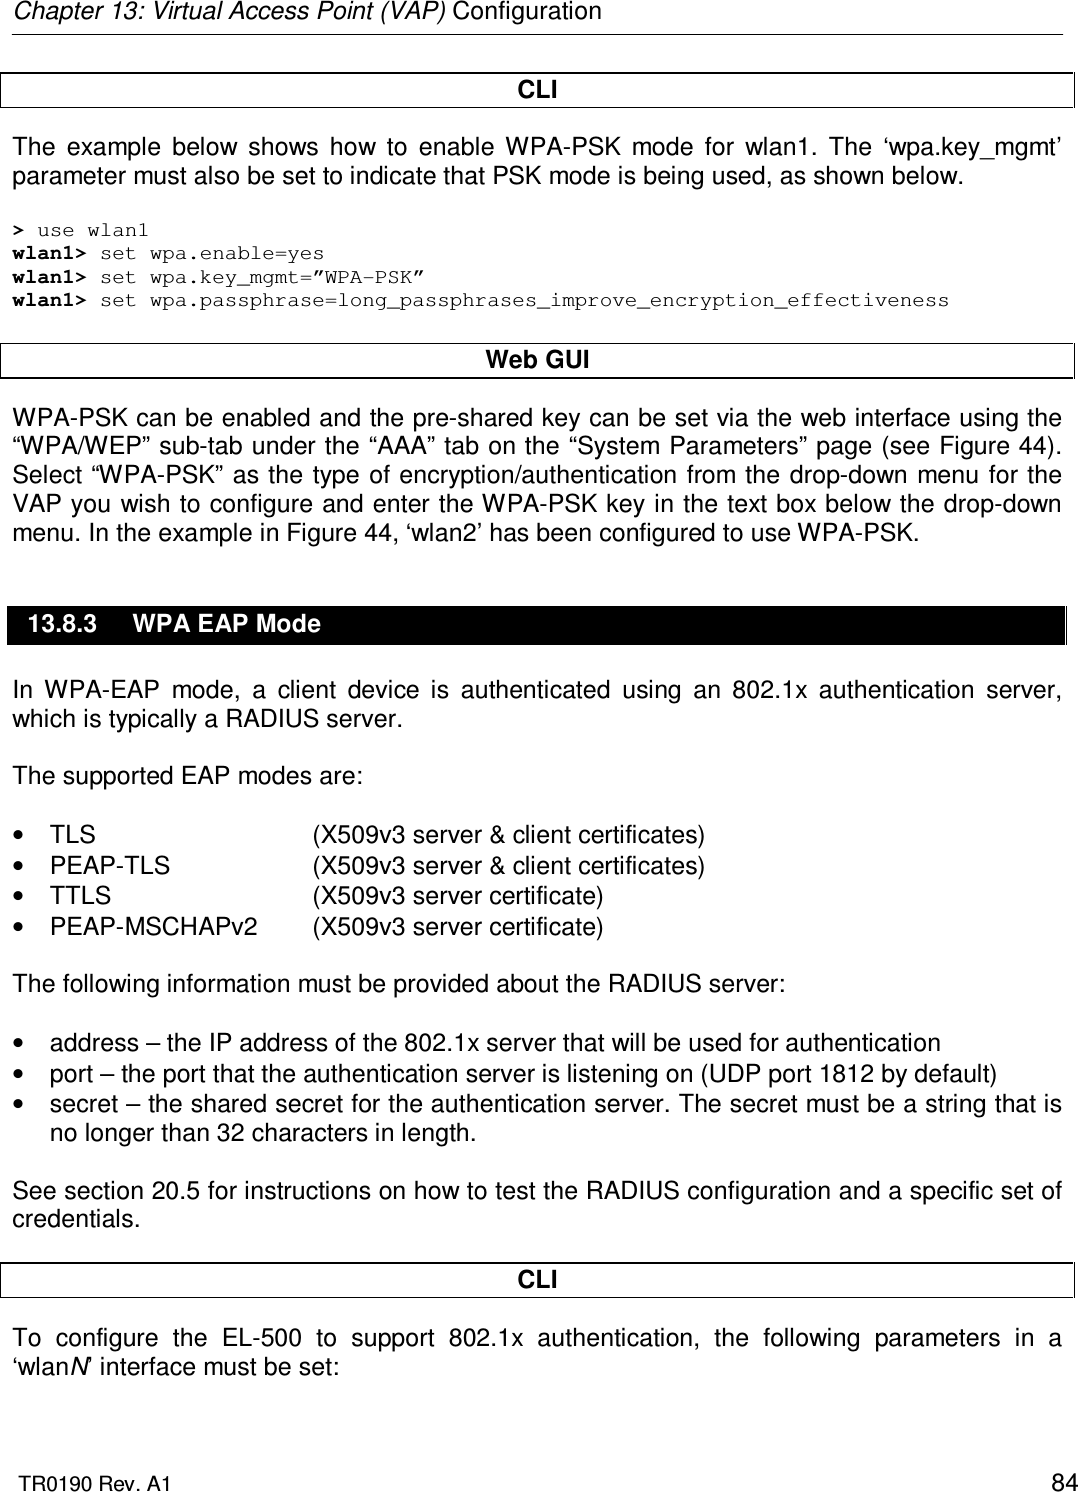 Chapter 13: Virtual Access Point (VAP) Configuration  TR0190 Rev. A1    84 CLI The  example  below  shows  how  to  enable  WPA-PSK  mode  for  wlan1.  The  ‘wpa.key_mgmt’ parameter must also be set to indicate that PSK mode is being used, as shown below.  &gt; use wlan1 wlan1&gt; set wpa.enable=yes wlan1&gt; set wpa.key_mgmt=”WPA-PSK” wlan1&gt; set wpa.passphrase=long_passphrases_improve_encryption_effectiveness  Web GUI WPA-PSK can be enabled and the pre-shared key can be set via the web interface using the “WPA/WEP” sub-tab under the “AAA” tab on the “System Parameters” page (see Figure 44). Select “WPA-PSK” as the type of encryption/authentication from the drop-down menu for the VAP you wish to configure and enter the WPA-PSK key in the text box below the drop-down menu. In the example in Figure 44, ‘wlan2’ has been configured to use WPA-PSK. 13.8.3  WPA EAP Mode In  WPA-EAP  mode,  a  client  device  is  authenticated  using  an  802.1x  authentication  server, which is typically a RADIUS server.   The supported EAP modes are:  •  TLS      (X509v3 server &amp; client certificates) •  PEAP-TLS    (X509v3 server &amp; client certificates) •  TTLS      (X509v3 server certificate) •  PEAP-MSCHAPv2  (X509v3 server certificate)  The following information must be provided about the RADIUS server:  •  address – the IP address of the 802.1x server that will be used for authentication •  port – the port that the authentication server is listening on (UDP port 1812 by default) •  secret – the shared secret for the authentication server. The secret must be a string that is no longer than 32 characters in length.  See section 20.5 for instructions on how to test the RADIUS configuration and a specific set of credentials.  CLI To  configure  the  EL-500  to  support  802.1x  authentication,  the  following  parameters  in  a ‘wlanN’ interface must be set:  